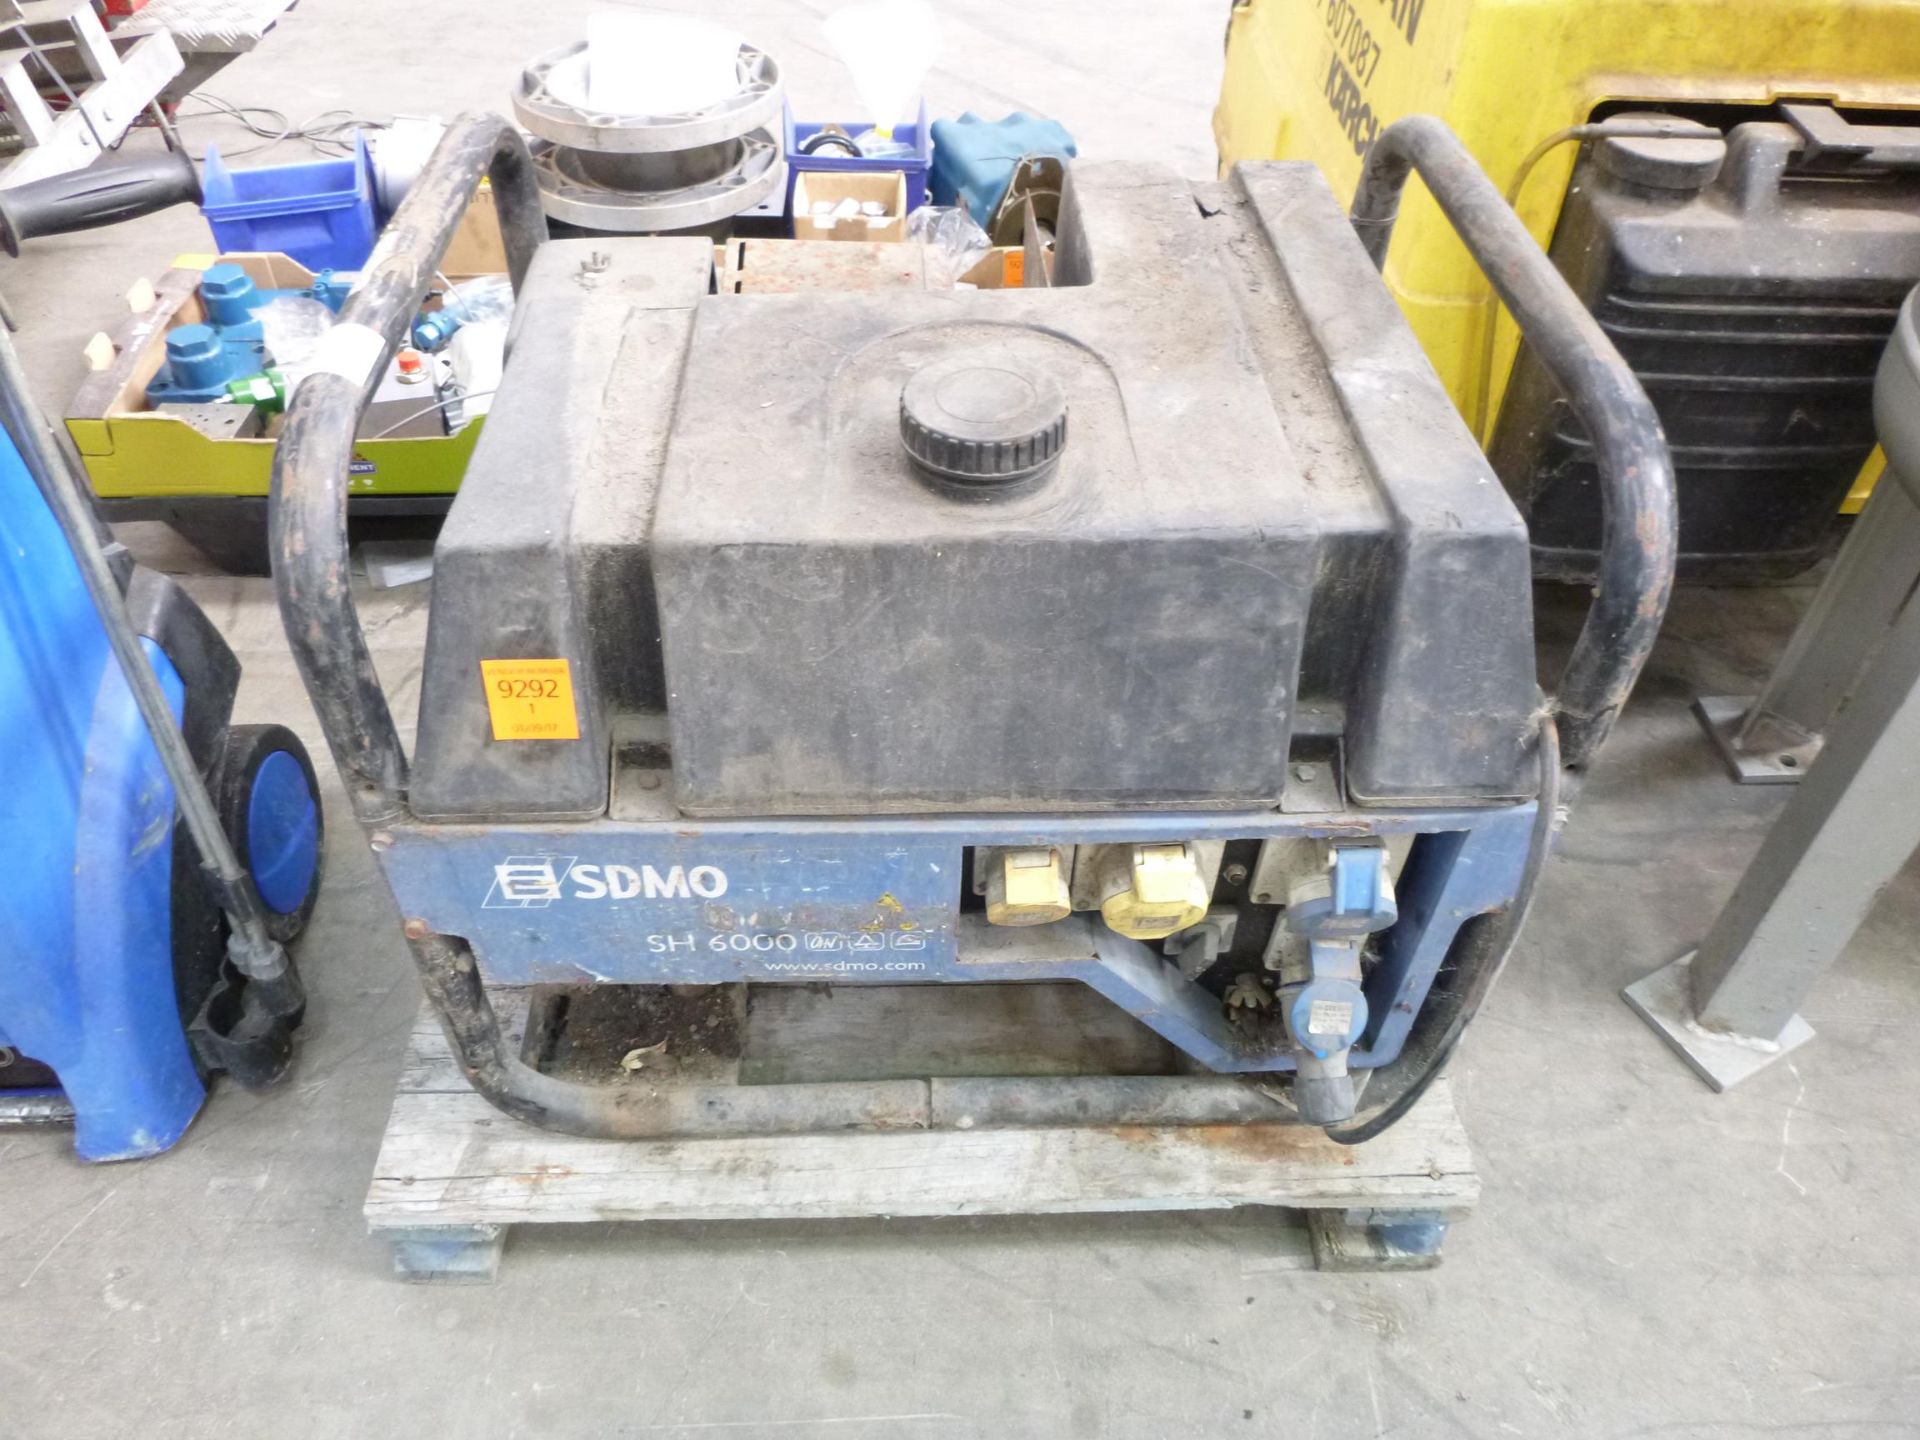 An SDMO SH 6000 Diesel 110V/240V Generator. Please note there is a £10 plus Vat lift out fee on this